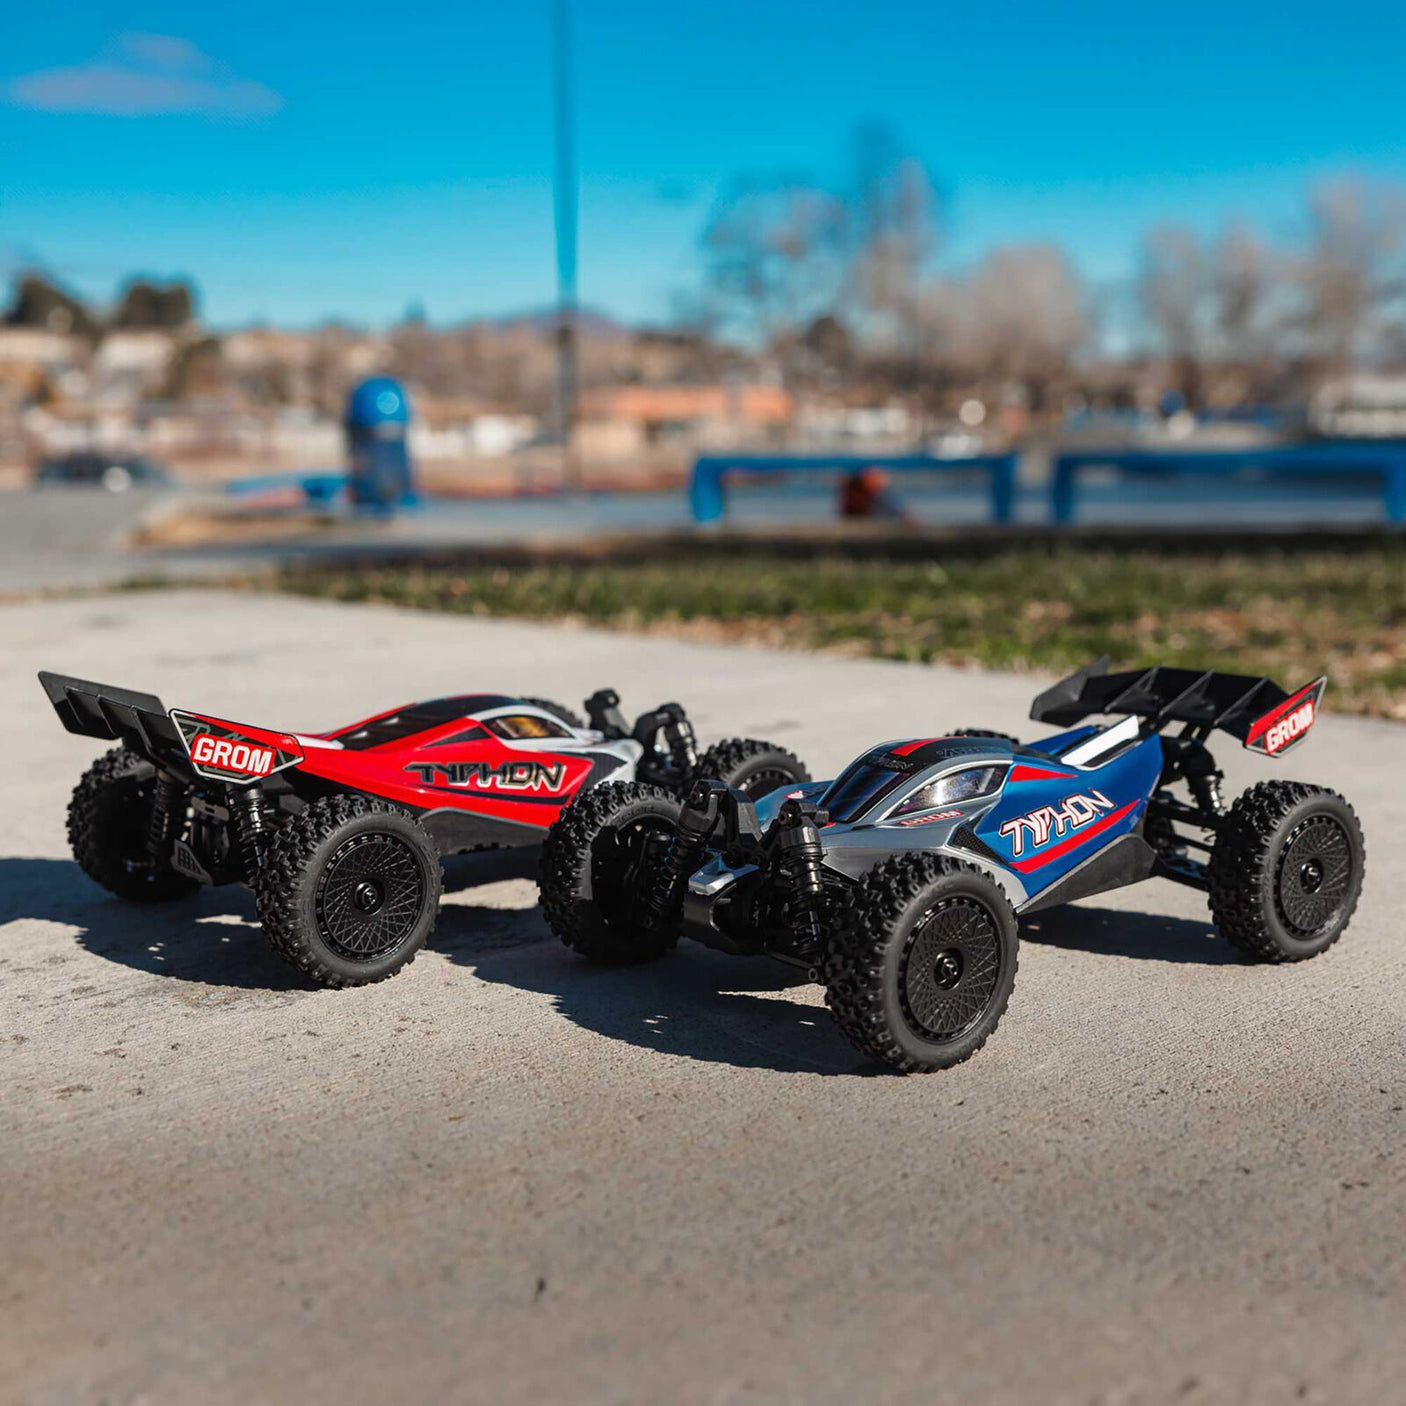 ARRMA - TYPHON GROM MEGA 380 BRUSHED 4X4 SMALL SCALE BUGGY RTR WITH BATTERY & CHARGER - BLUE/SILVER